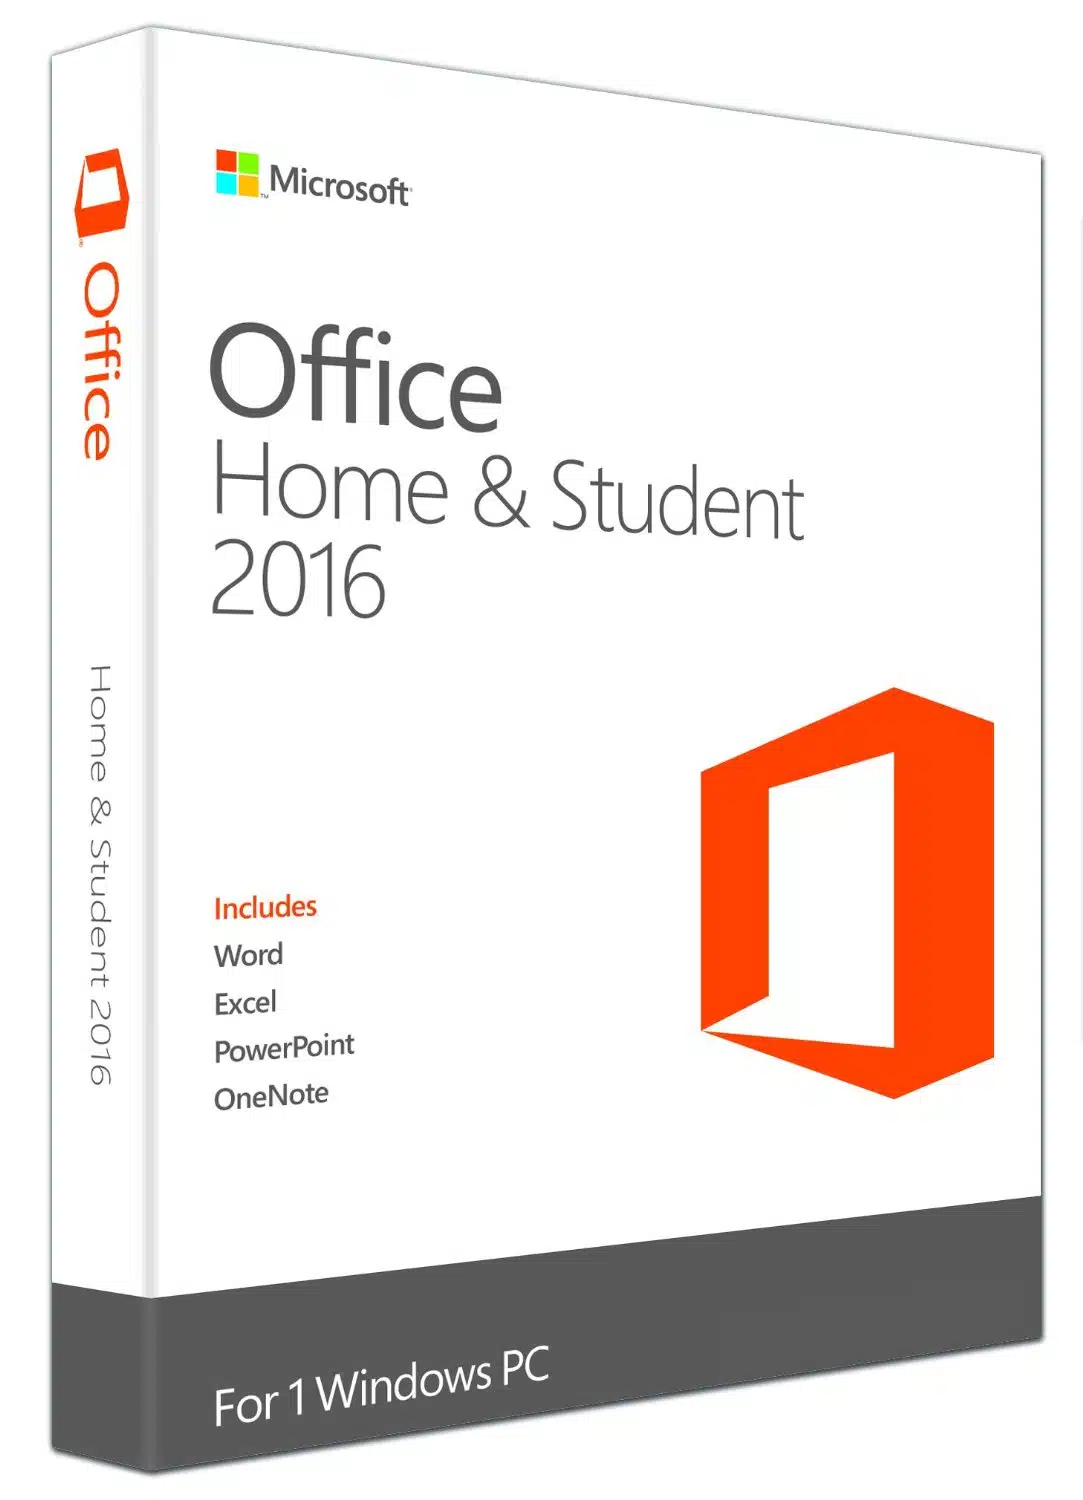 Microsoft Office Home & Student 2016 English Retail